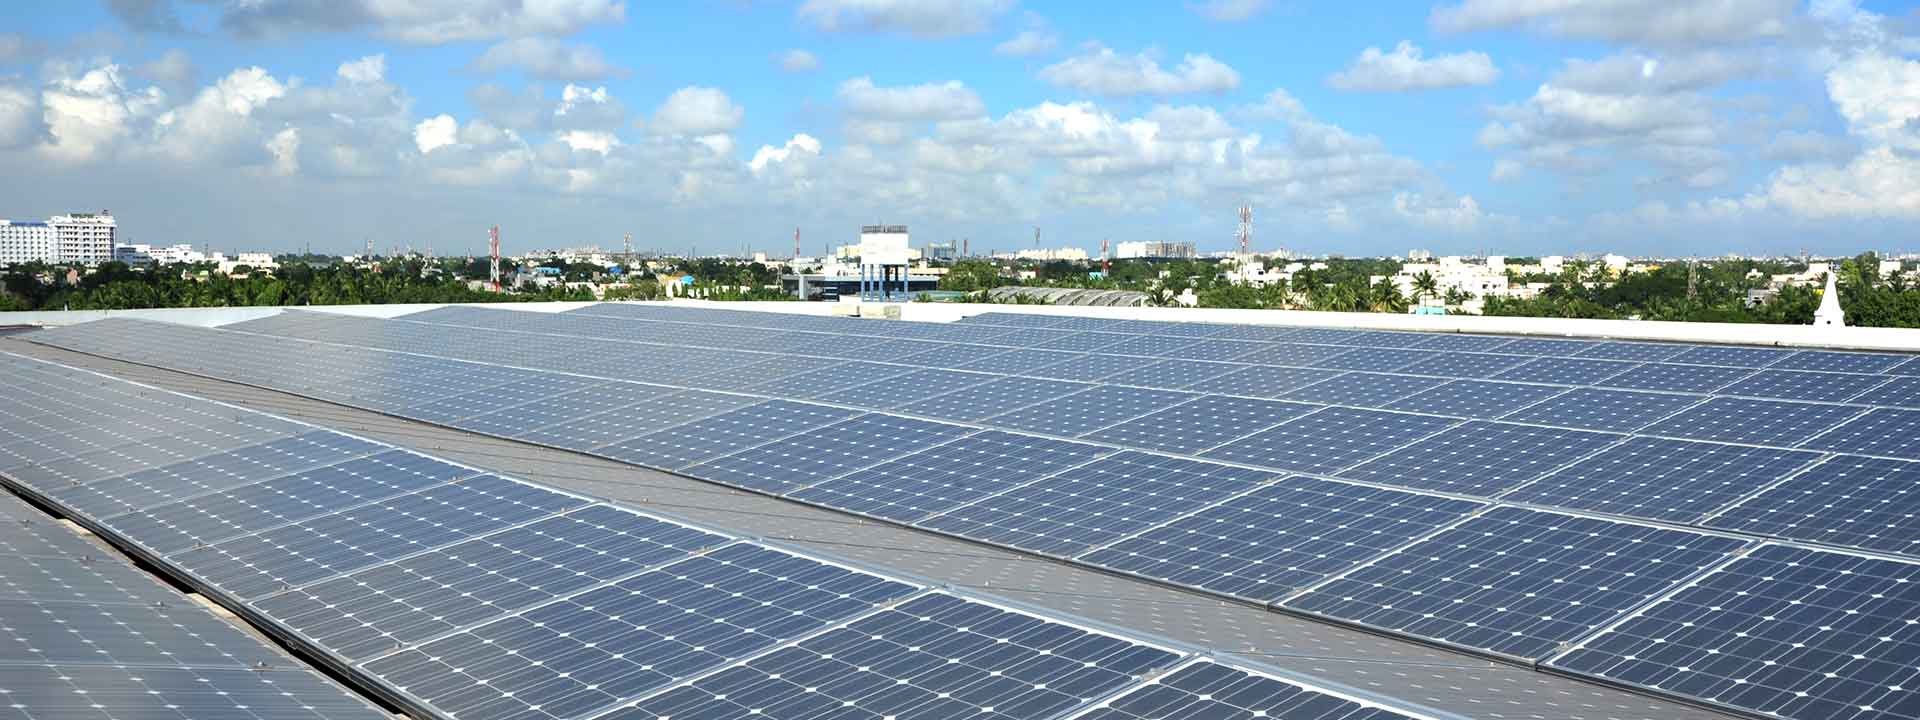 Roof Top Solar plant in Amritsar- L&T Construction